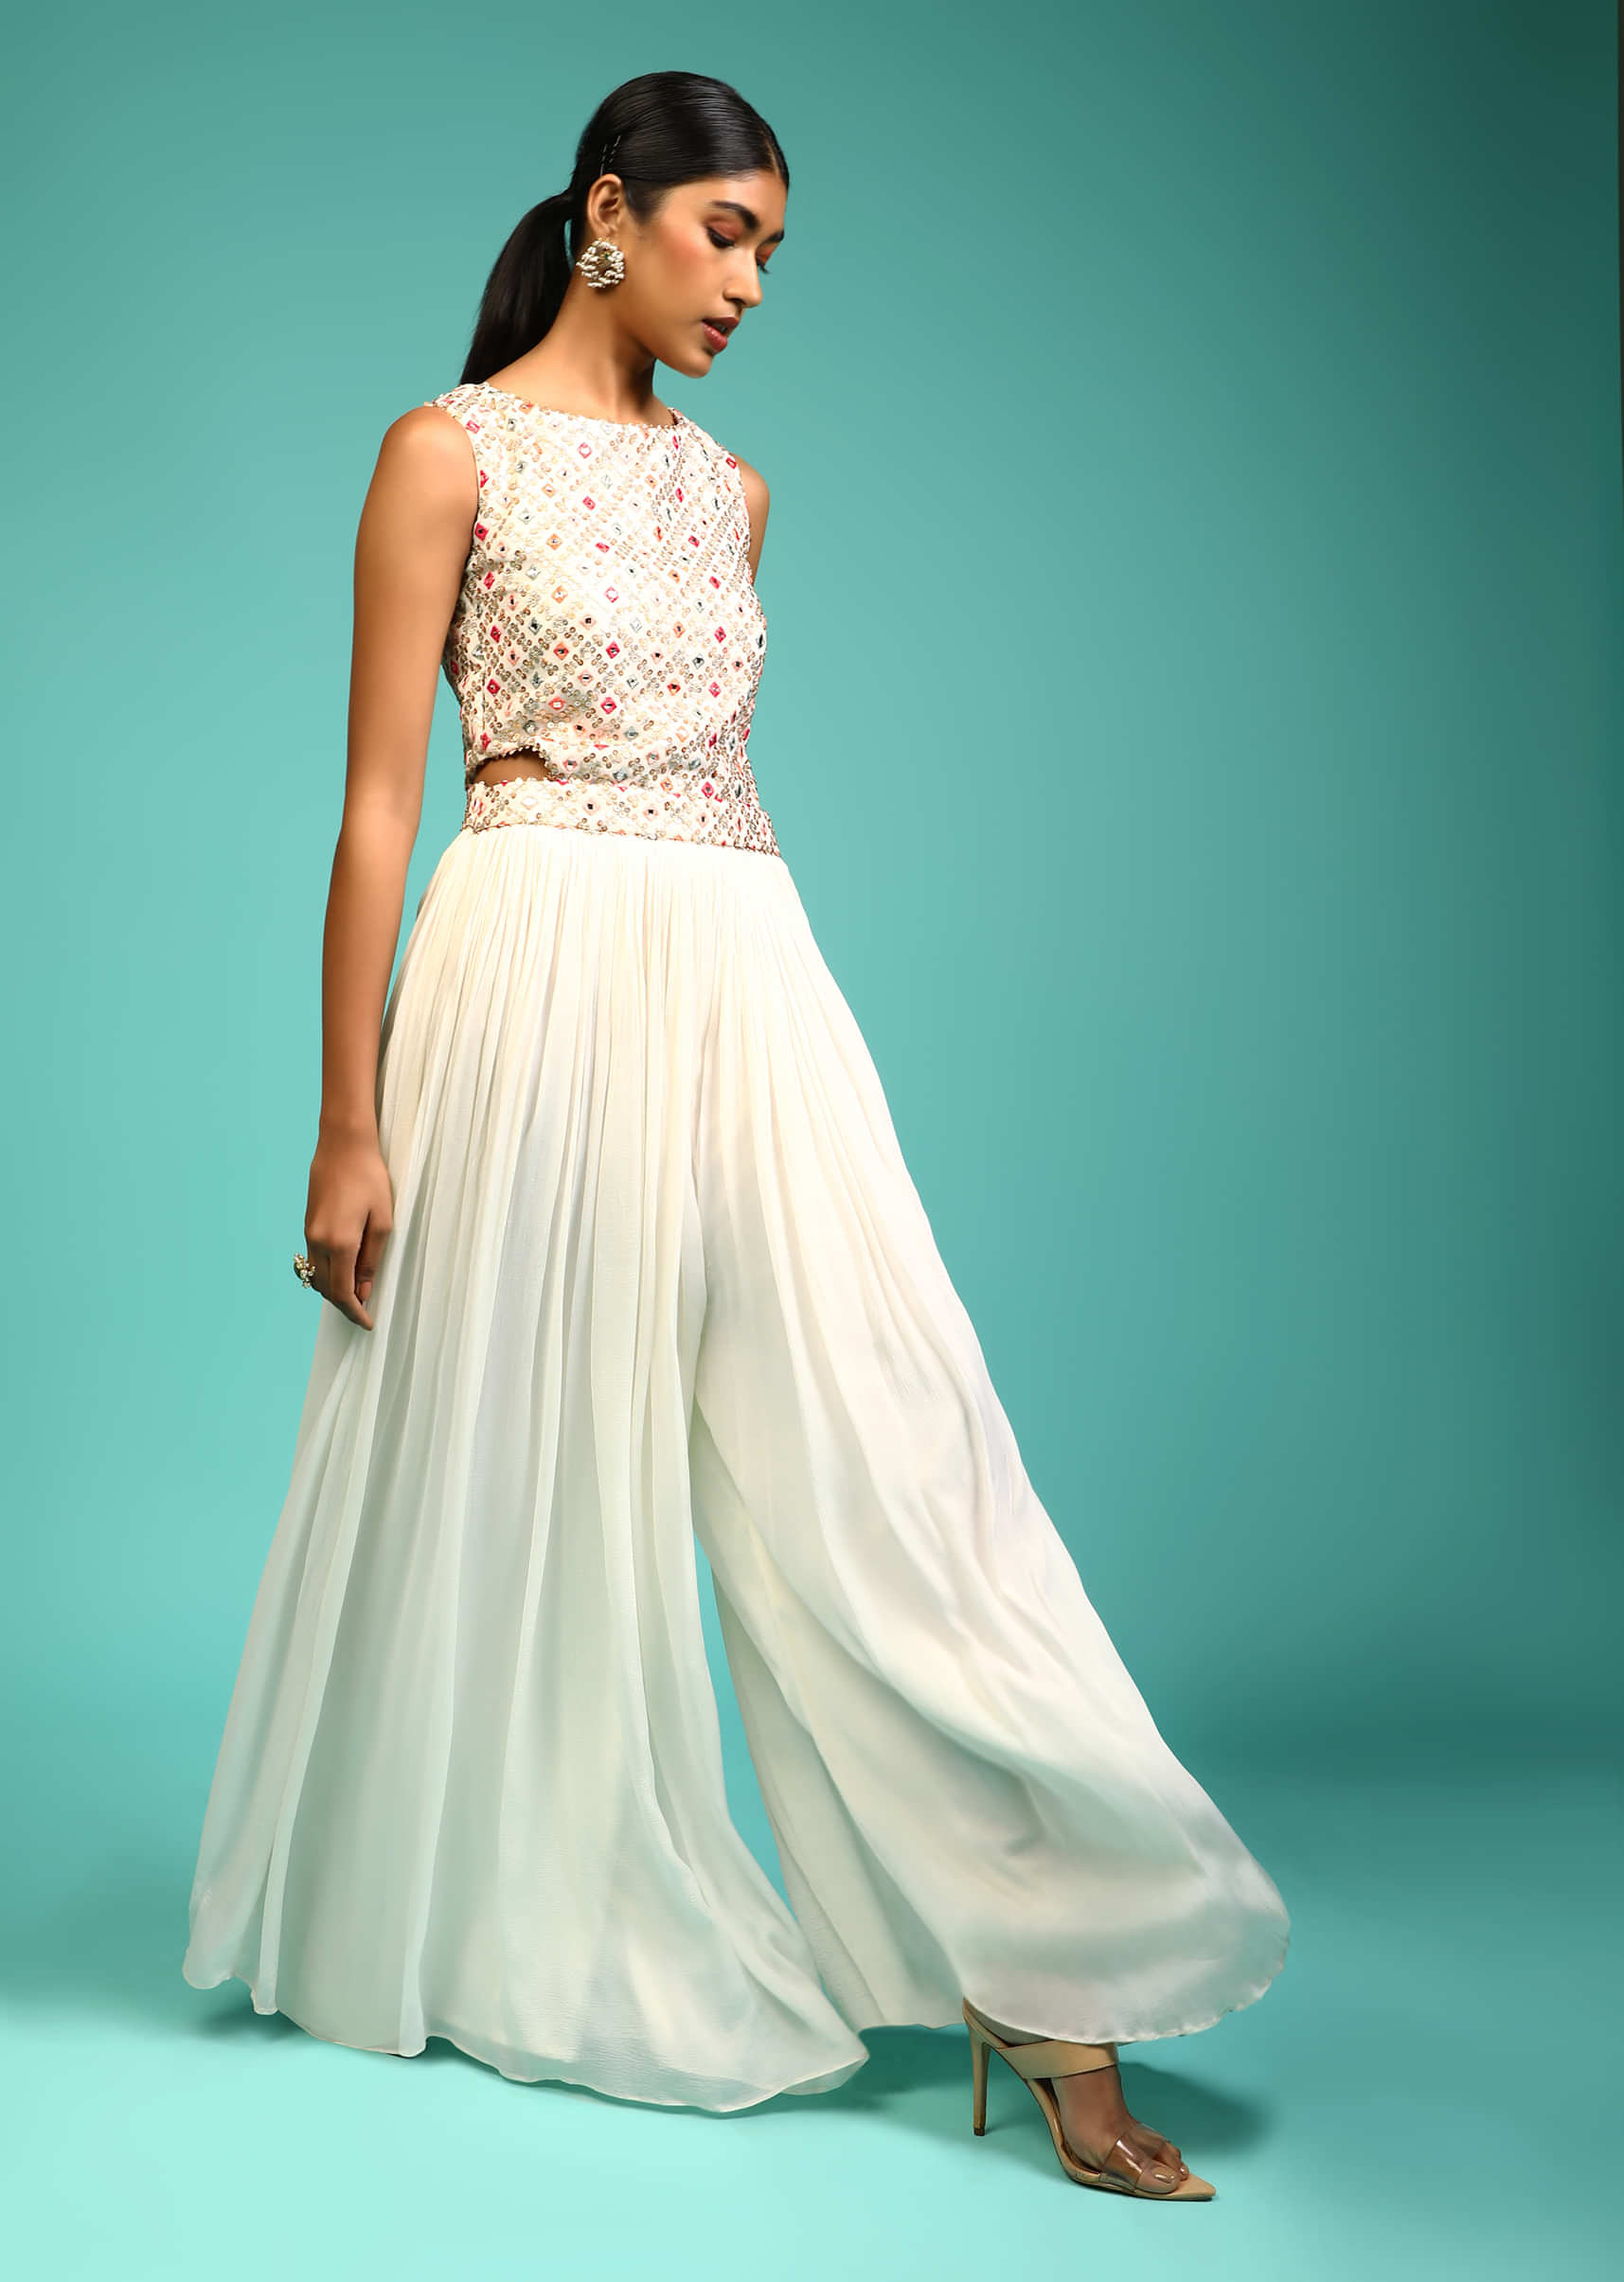 White Jumpsuit In Chiffon With Multi Colored Resham And Mirror Embroidered Bodice Along With Side Cut Outs  